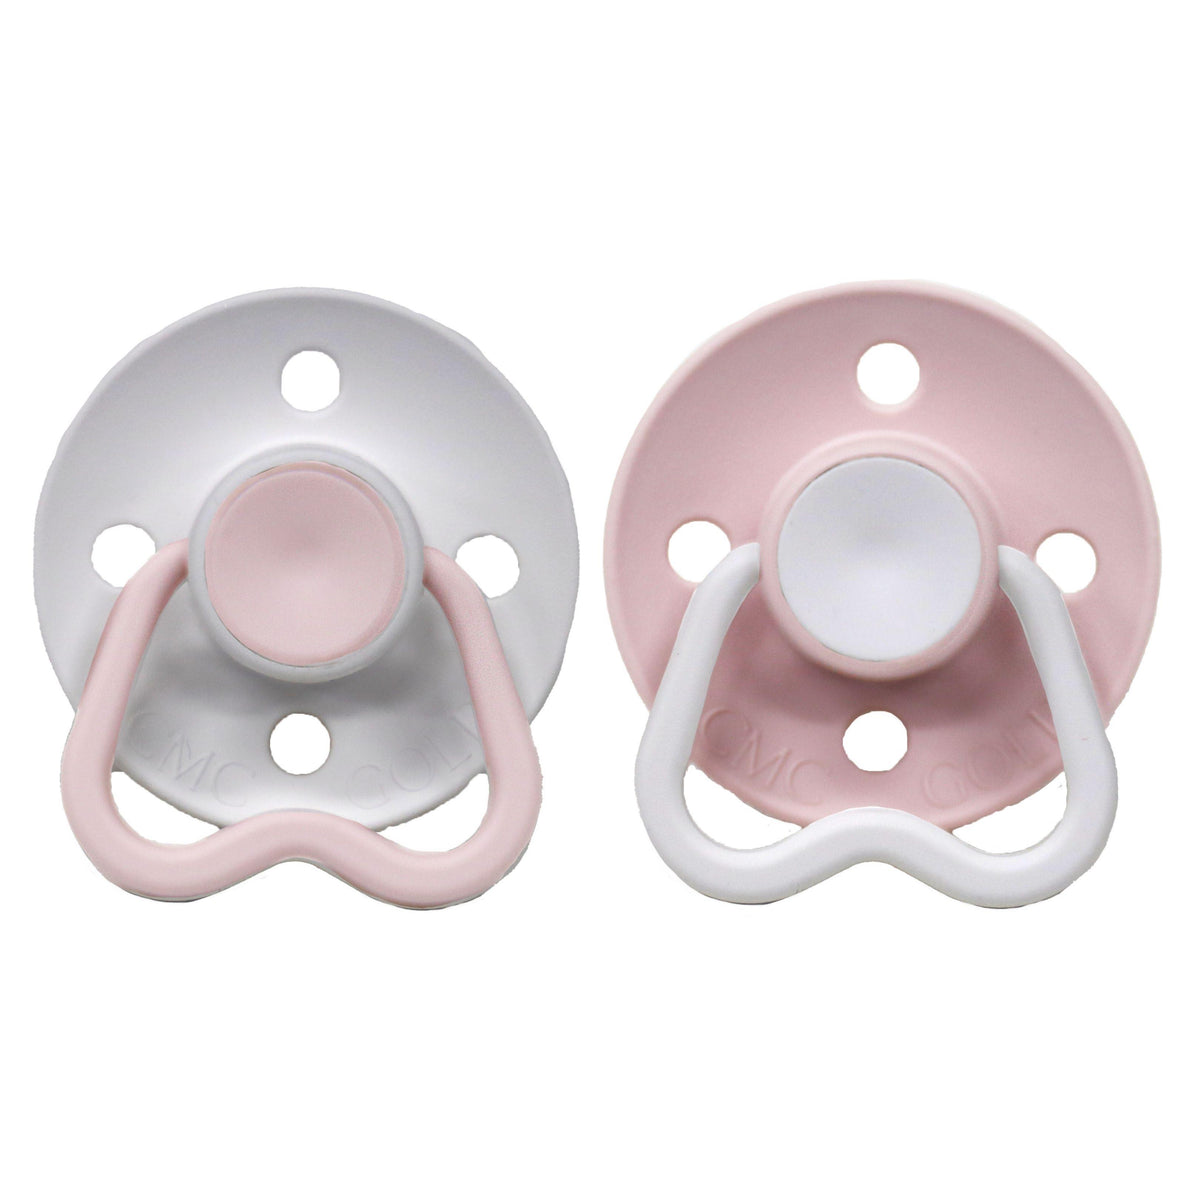 CMC Hold Me Dummies Varicoloured Twin Pack - VENTED TEAT